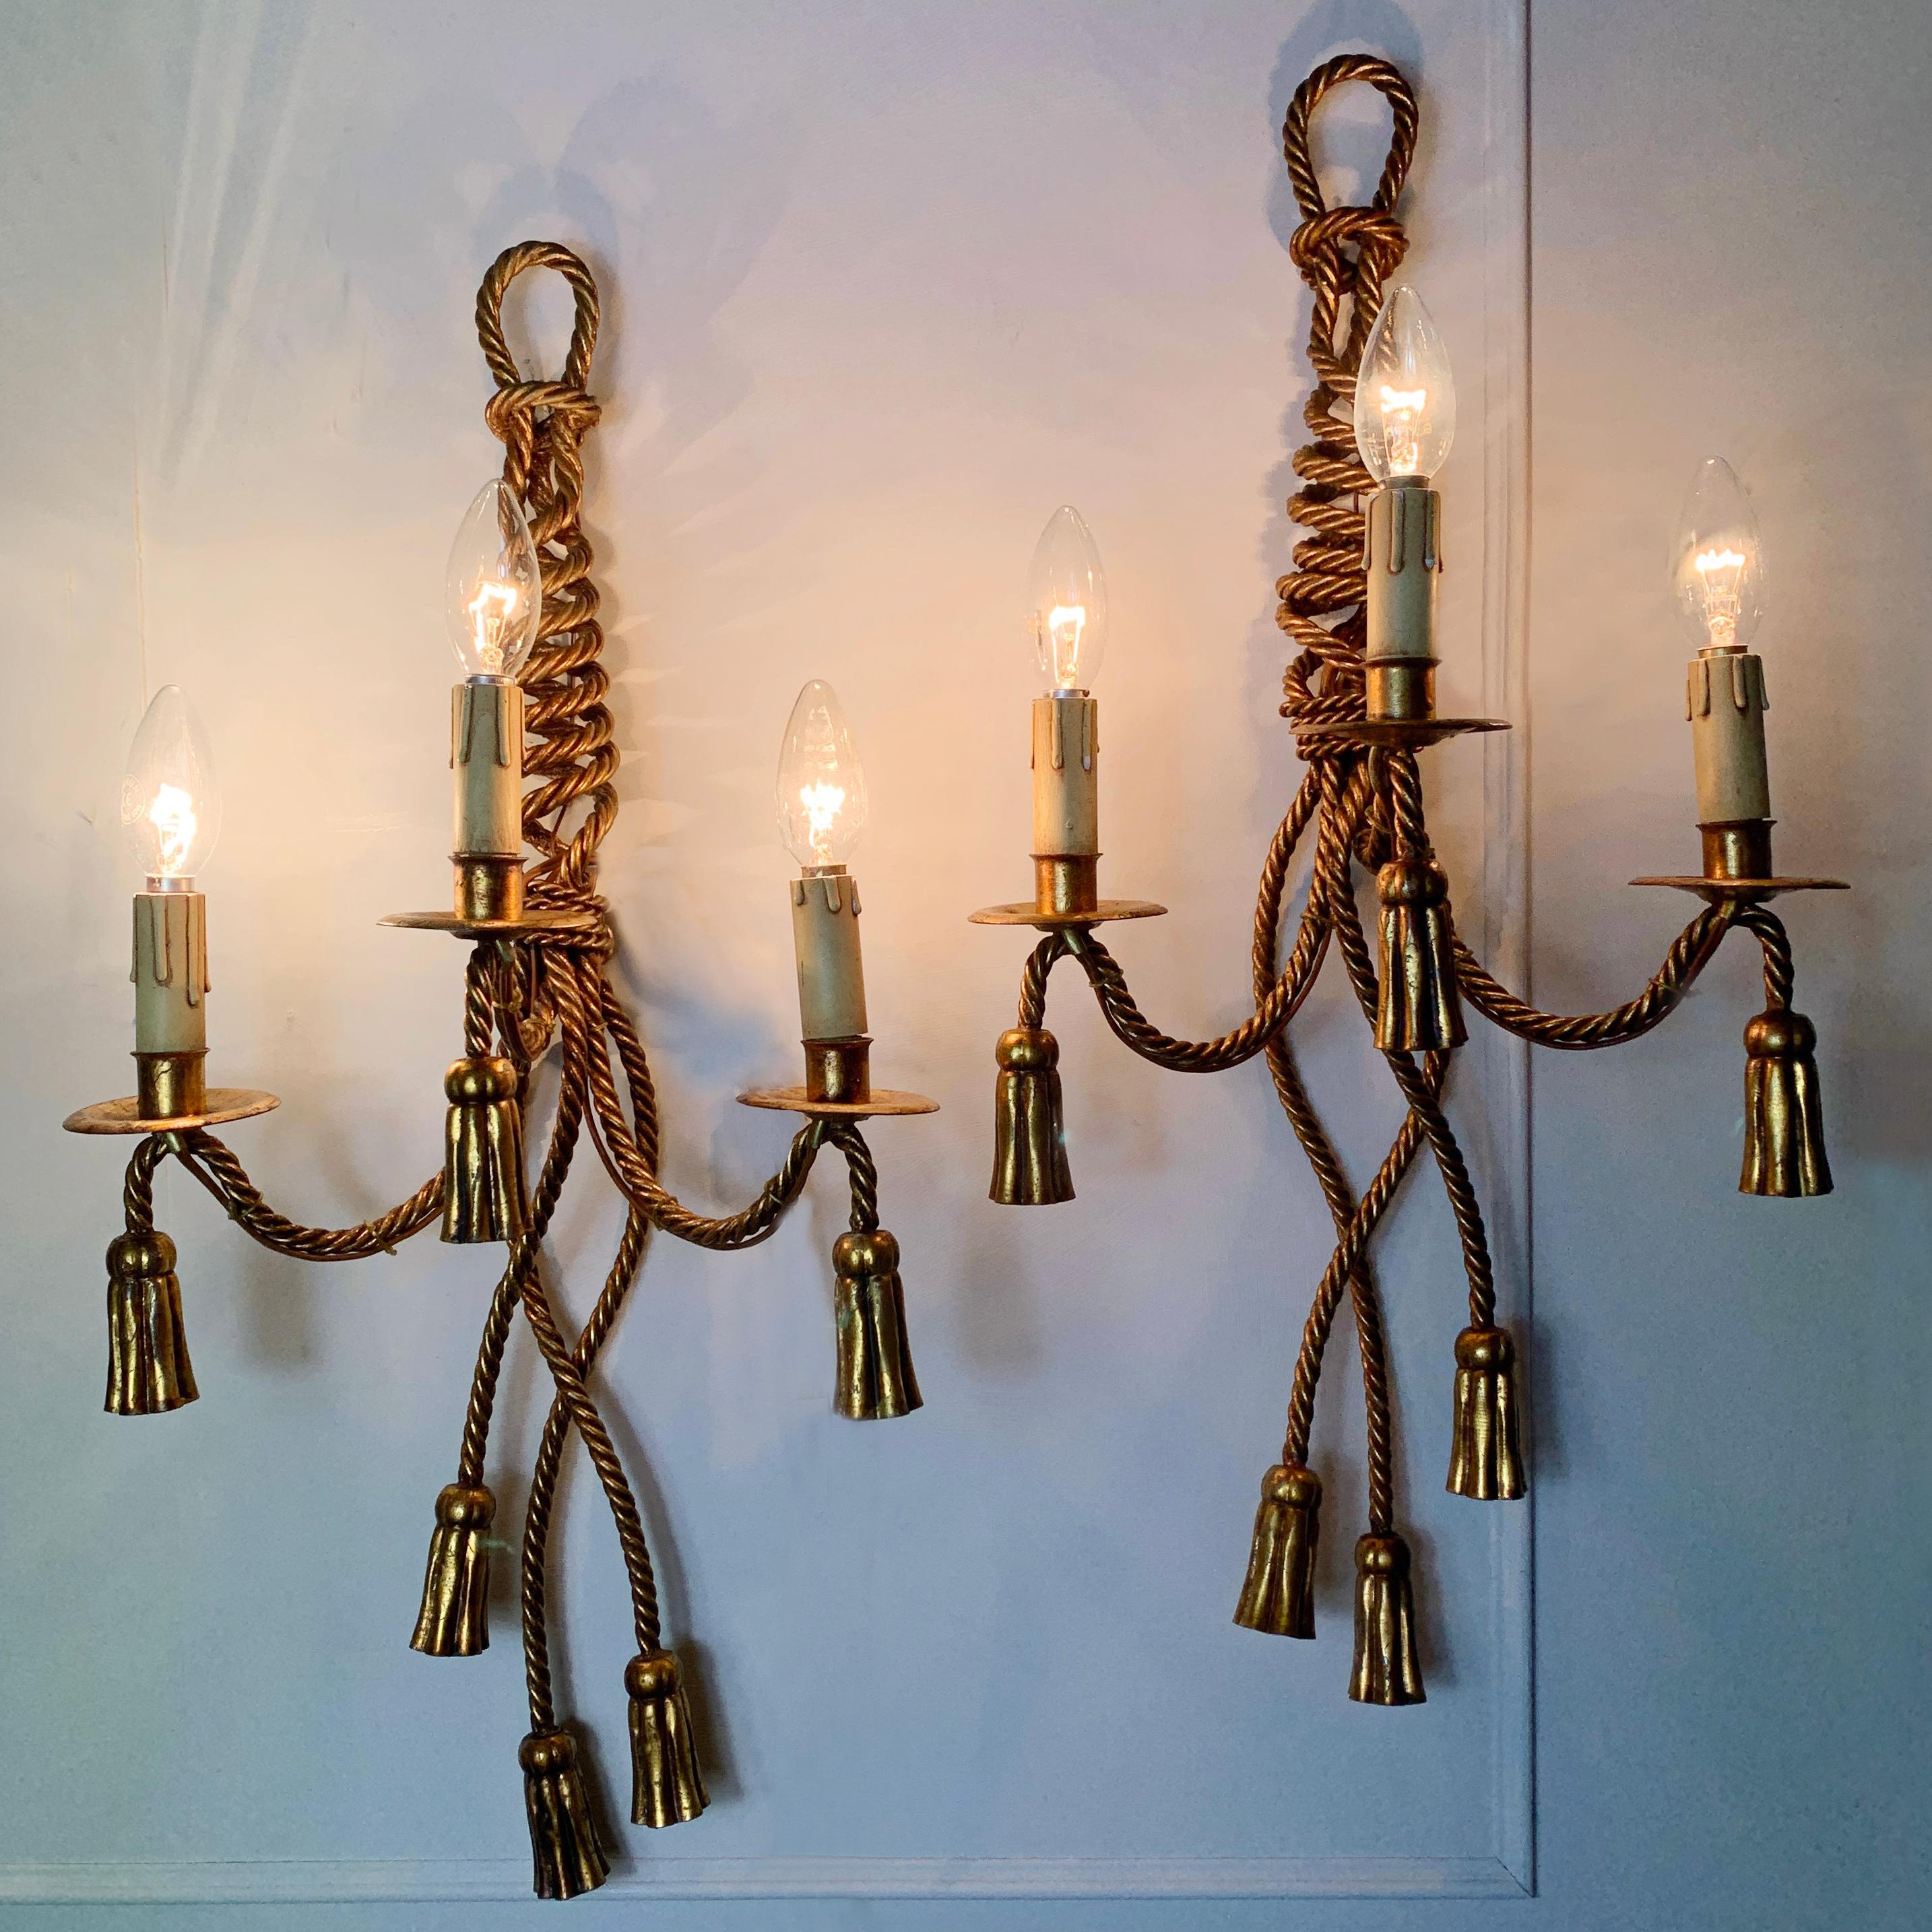 Italian gilt rope and tassel wall lights, circa 1950s
These large wall lights are beautifully crafted in solid gilt rope effect metal
They are heavy, large, high quality lights
Measures: 70 cm height, 33 cm width, 18.5 cm depth
Pat tested
There